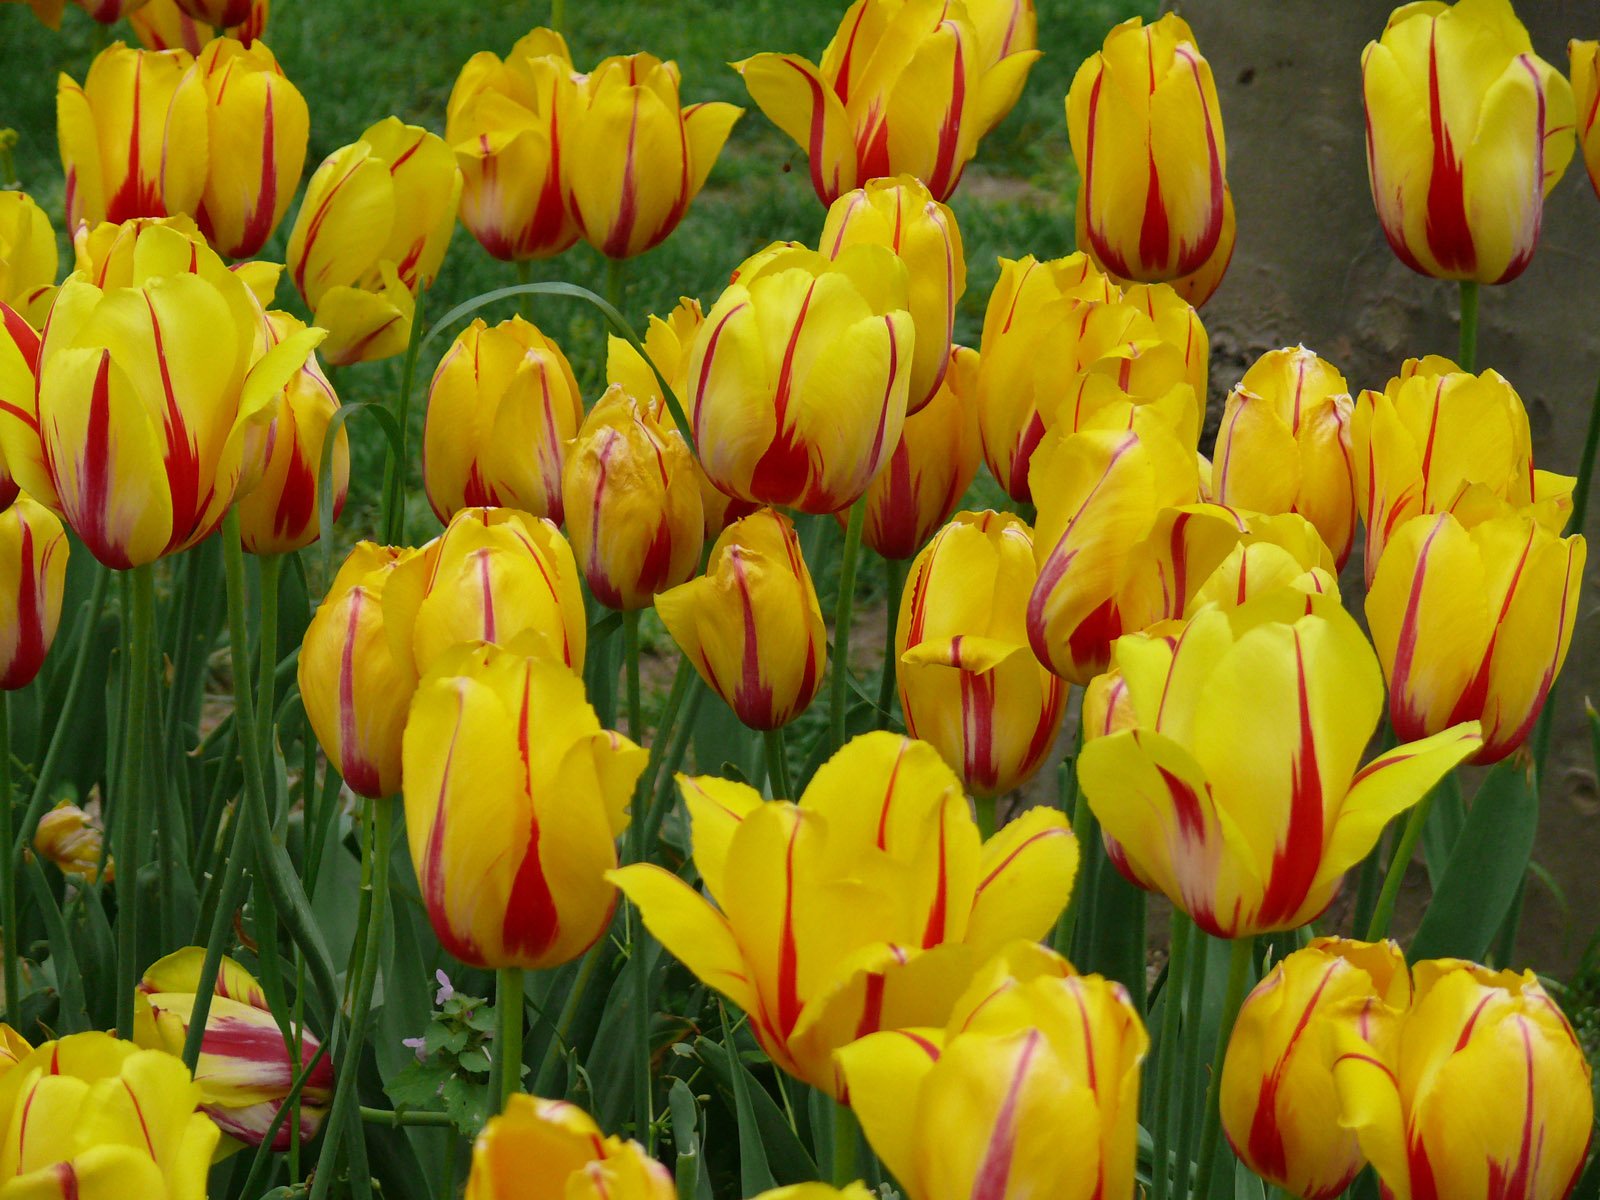 yellow and red striped flowers are shown close to each other